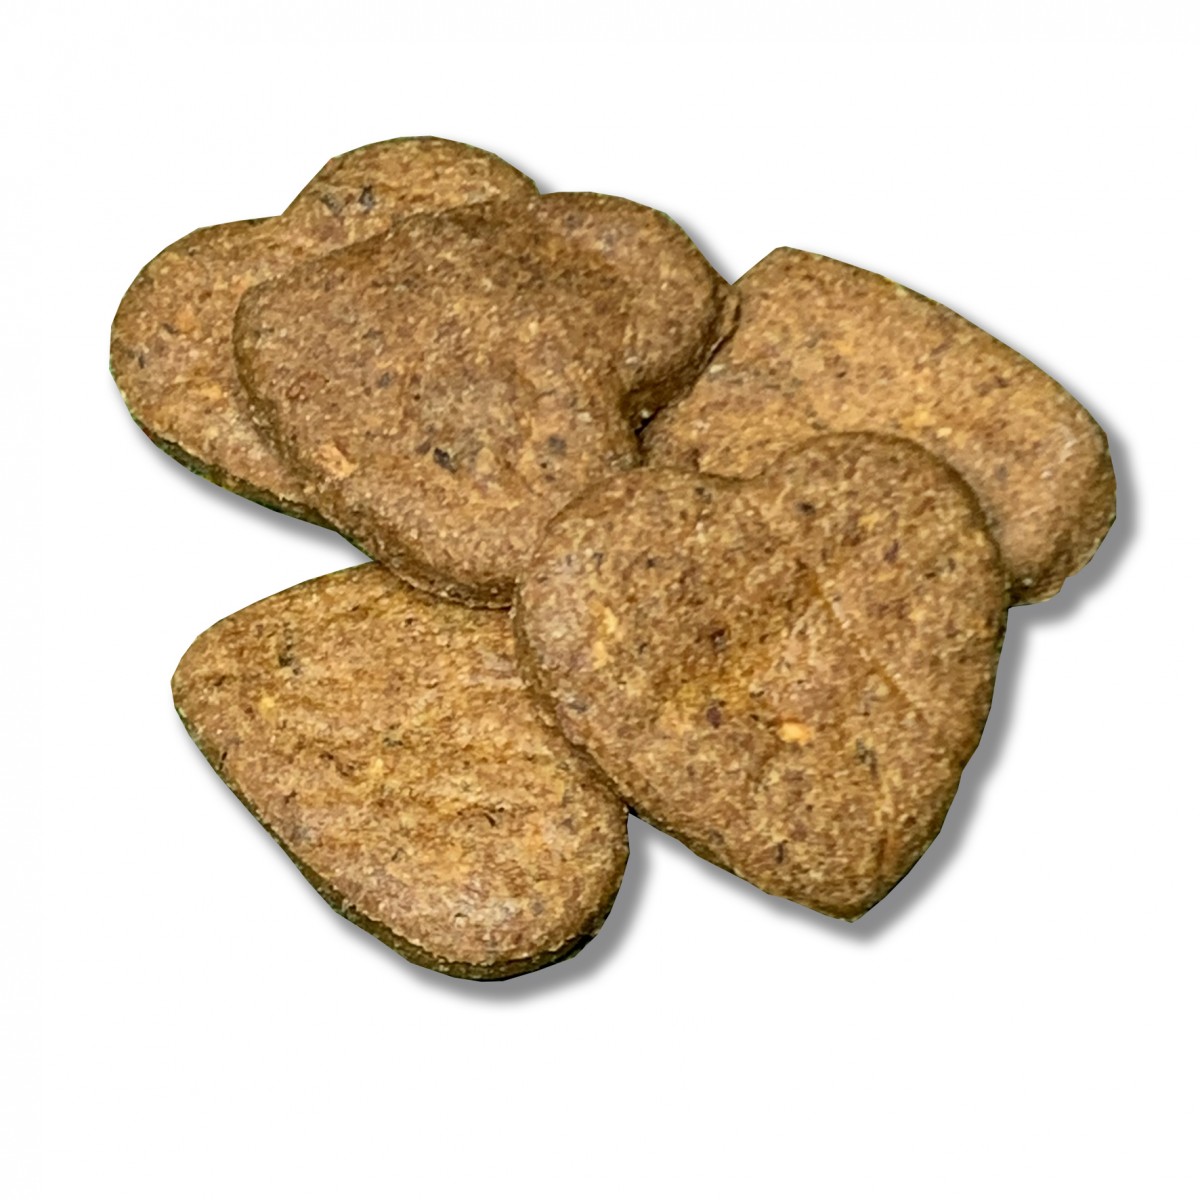  COOKIES DOG Mele e Cannella 100g